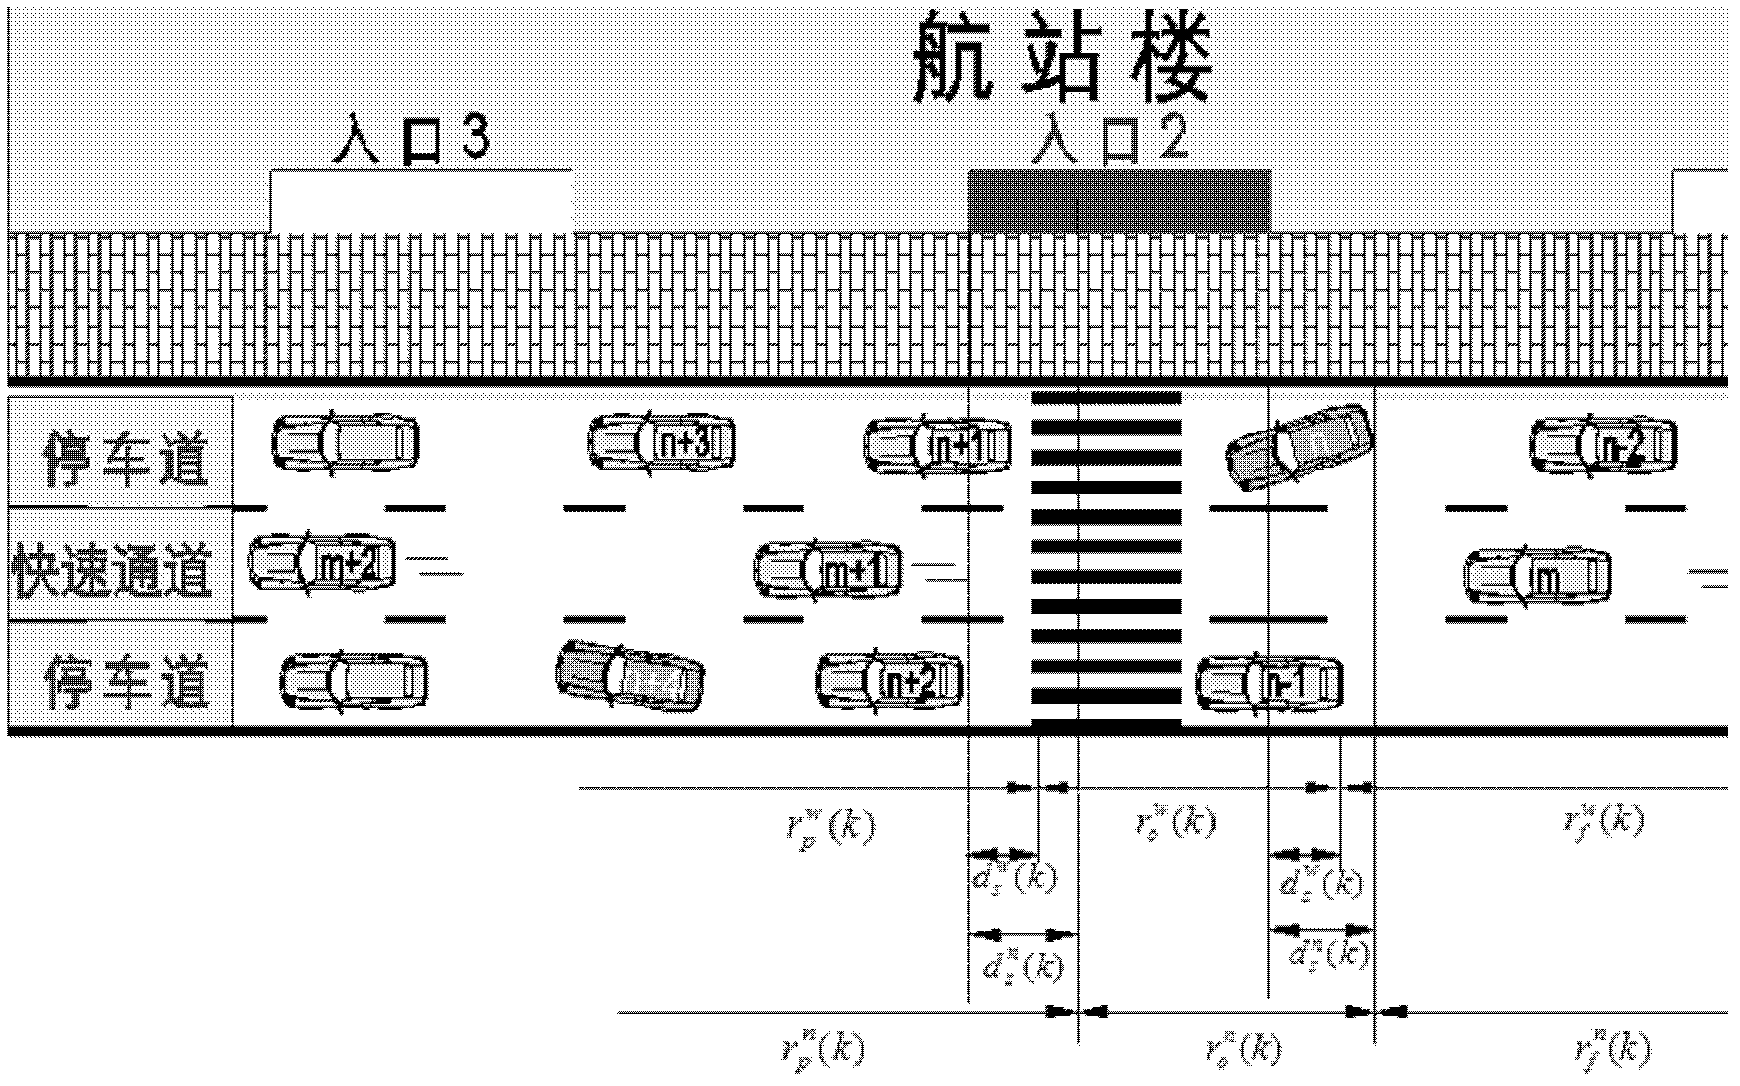 Method for determining side length of road with middle fast lanes